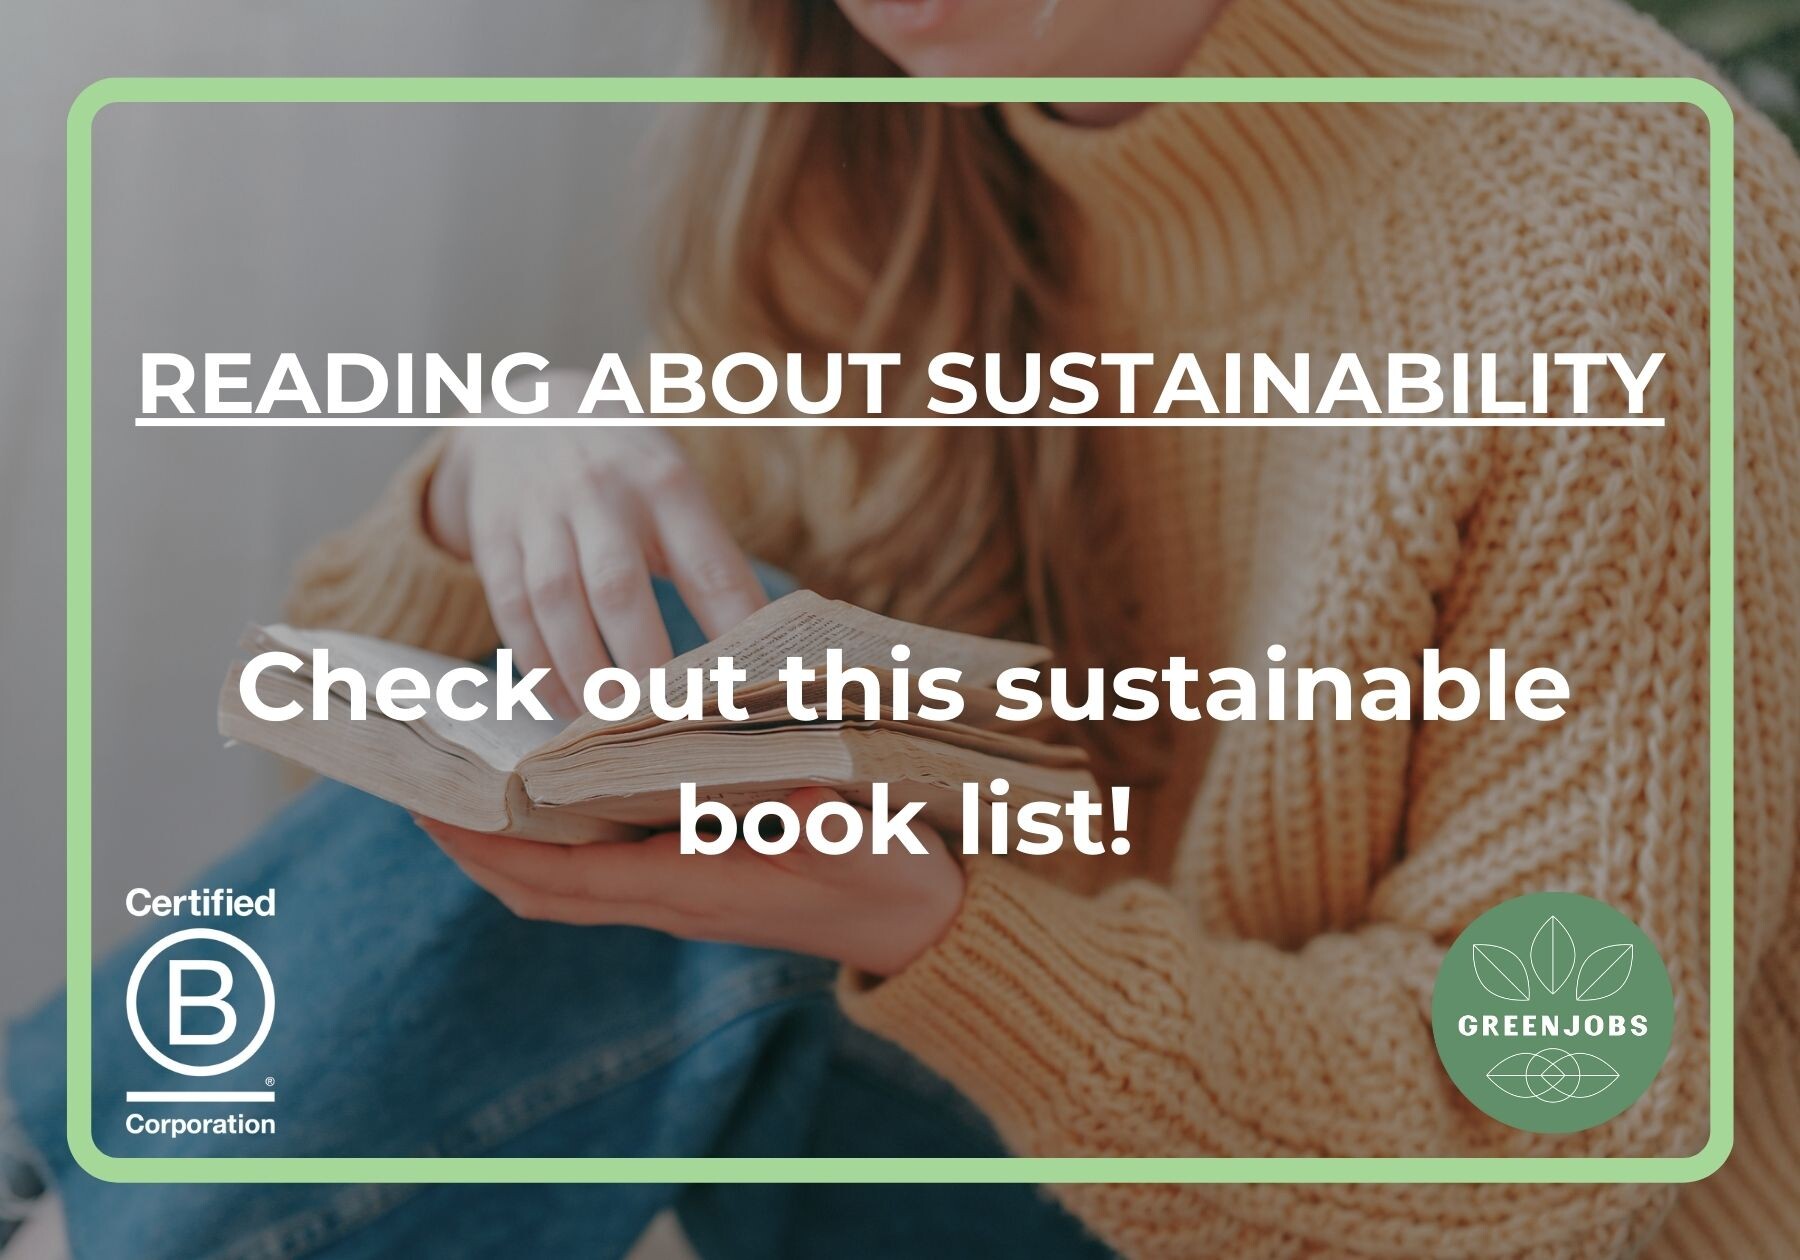 Want to read more about sustainability? Check out this sustainable book list!